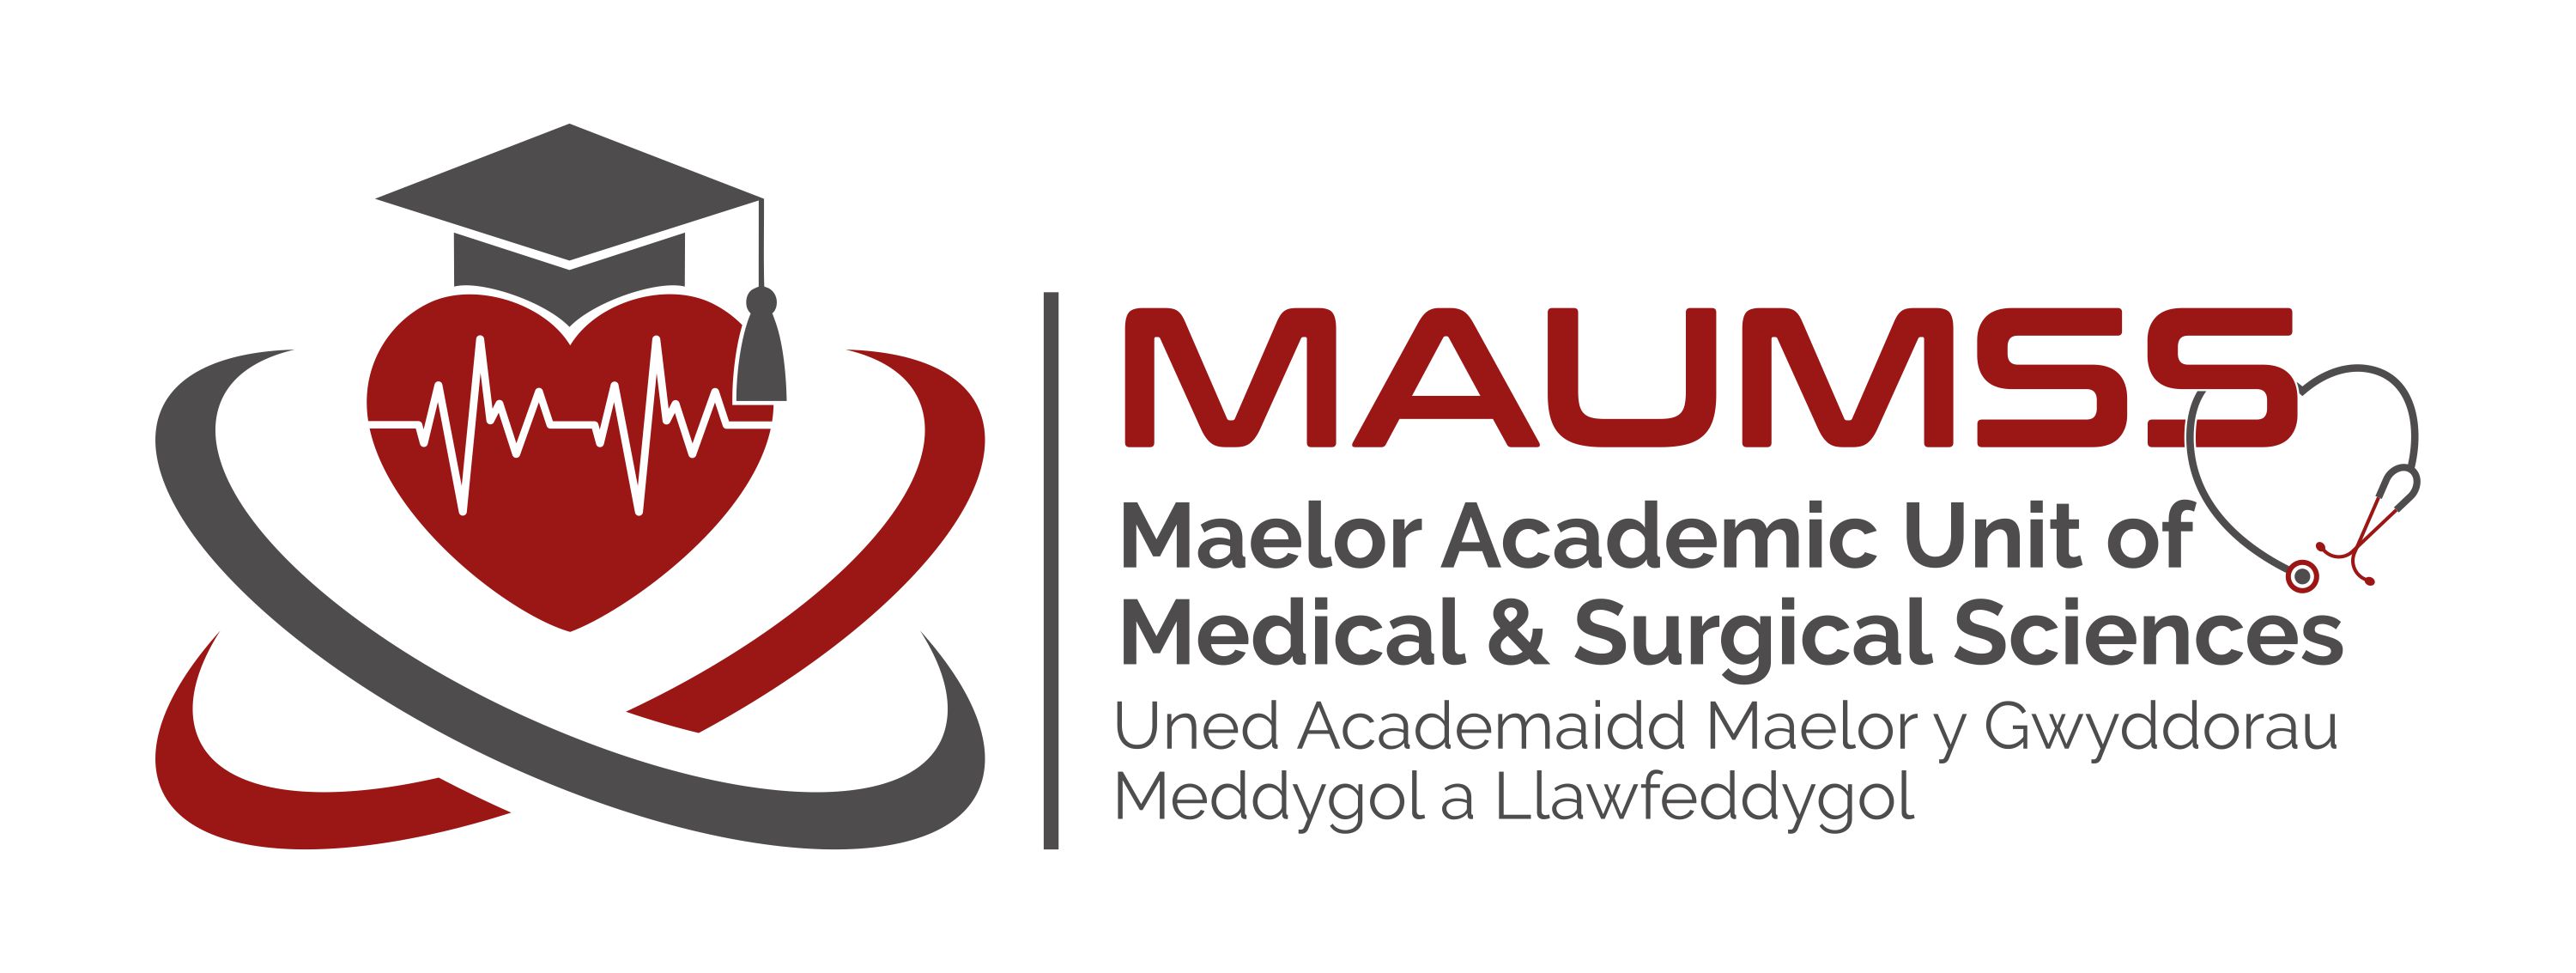 Maelor Academic Unit of Medical & Surgical Sciences (MAUMSS)